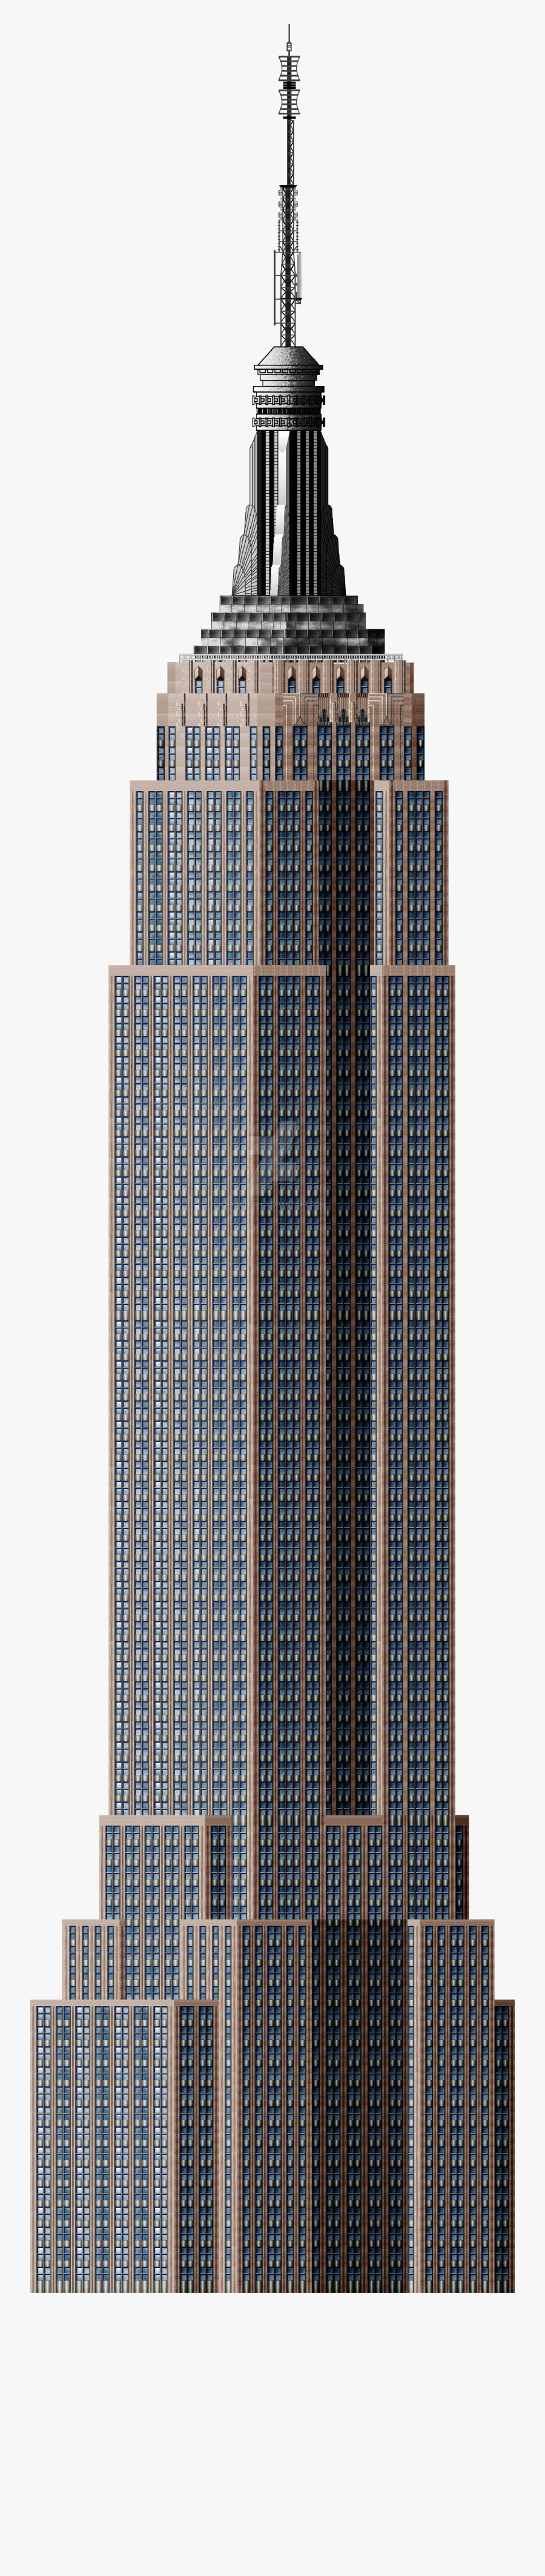 Empire State Building Png Clipart Transparent Library - Empire State Building Hd Transparent, Transparent Clipart